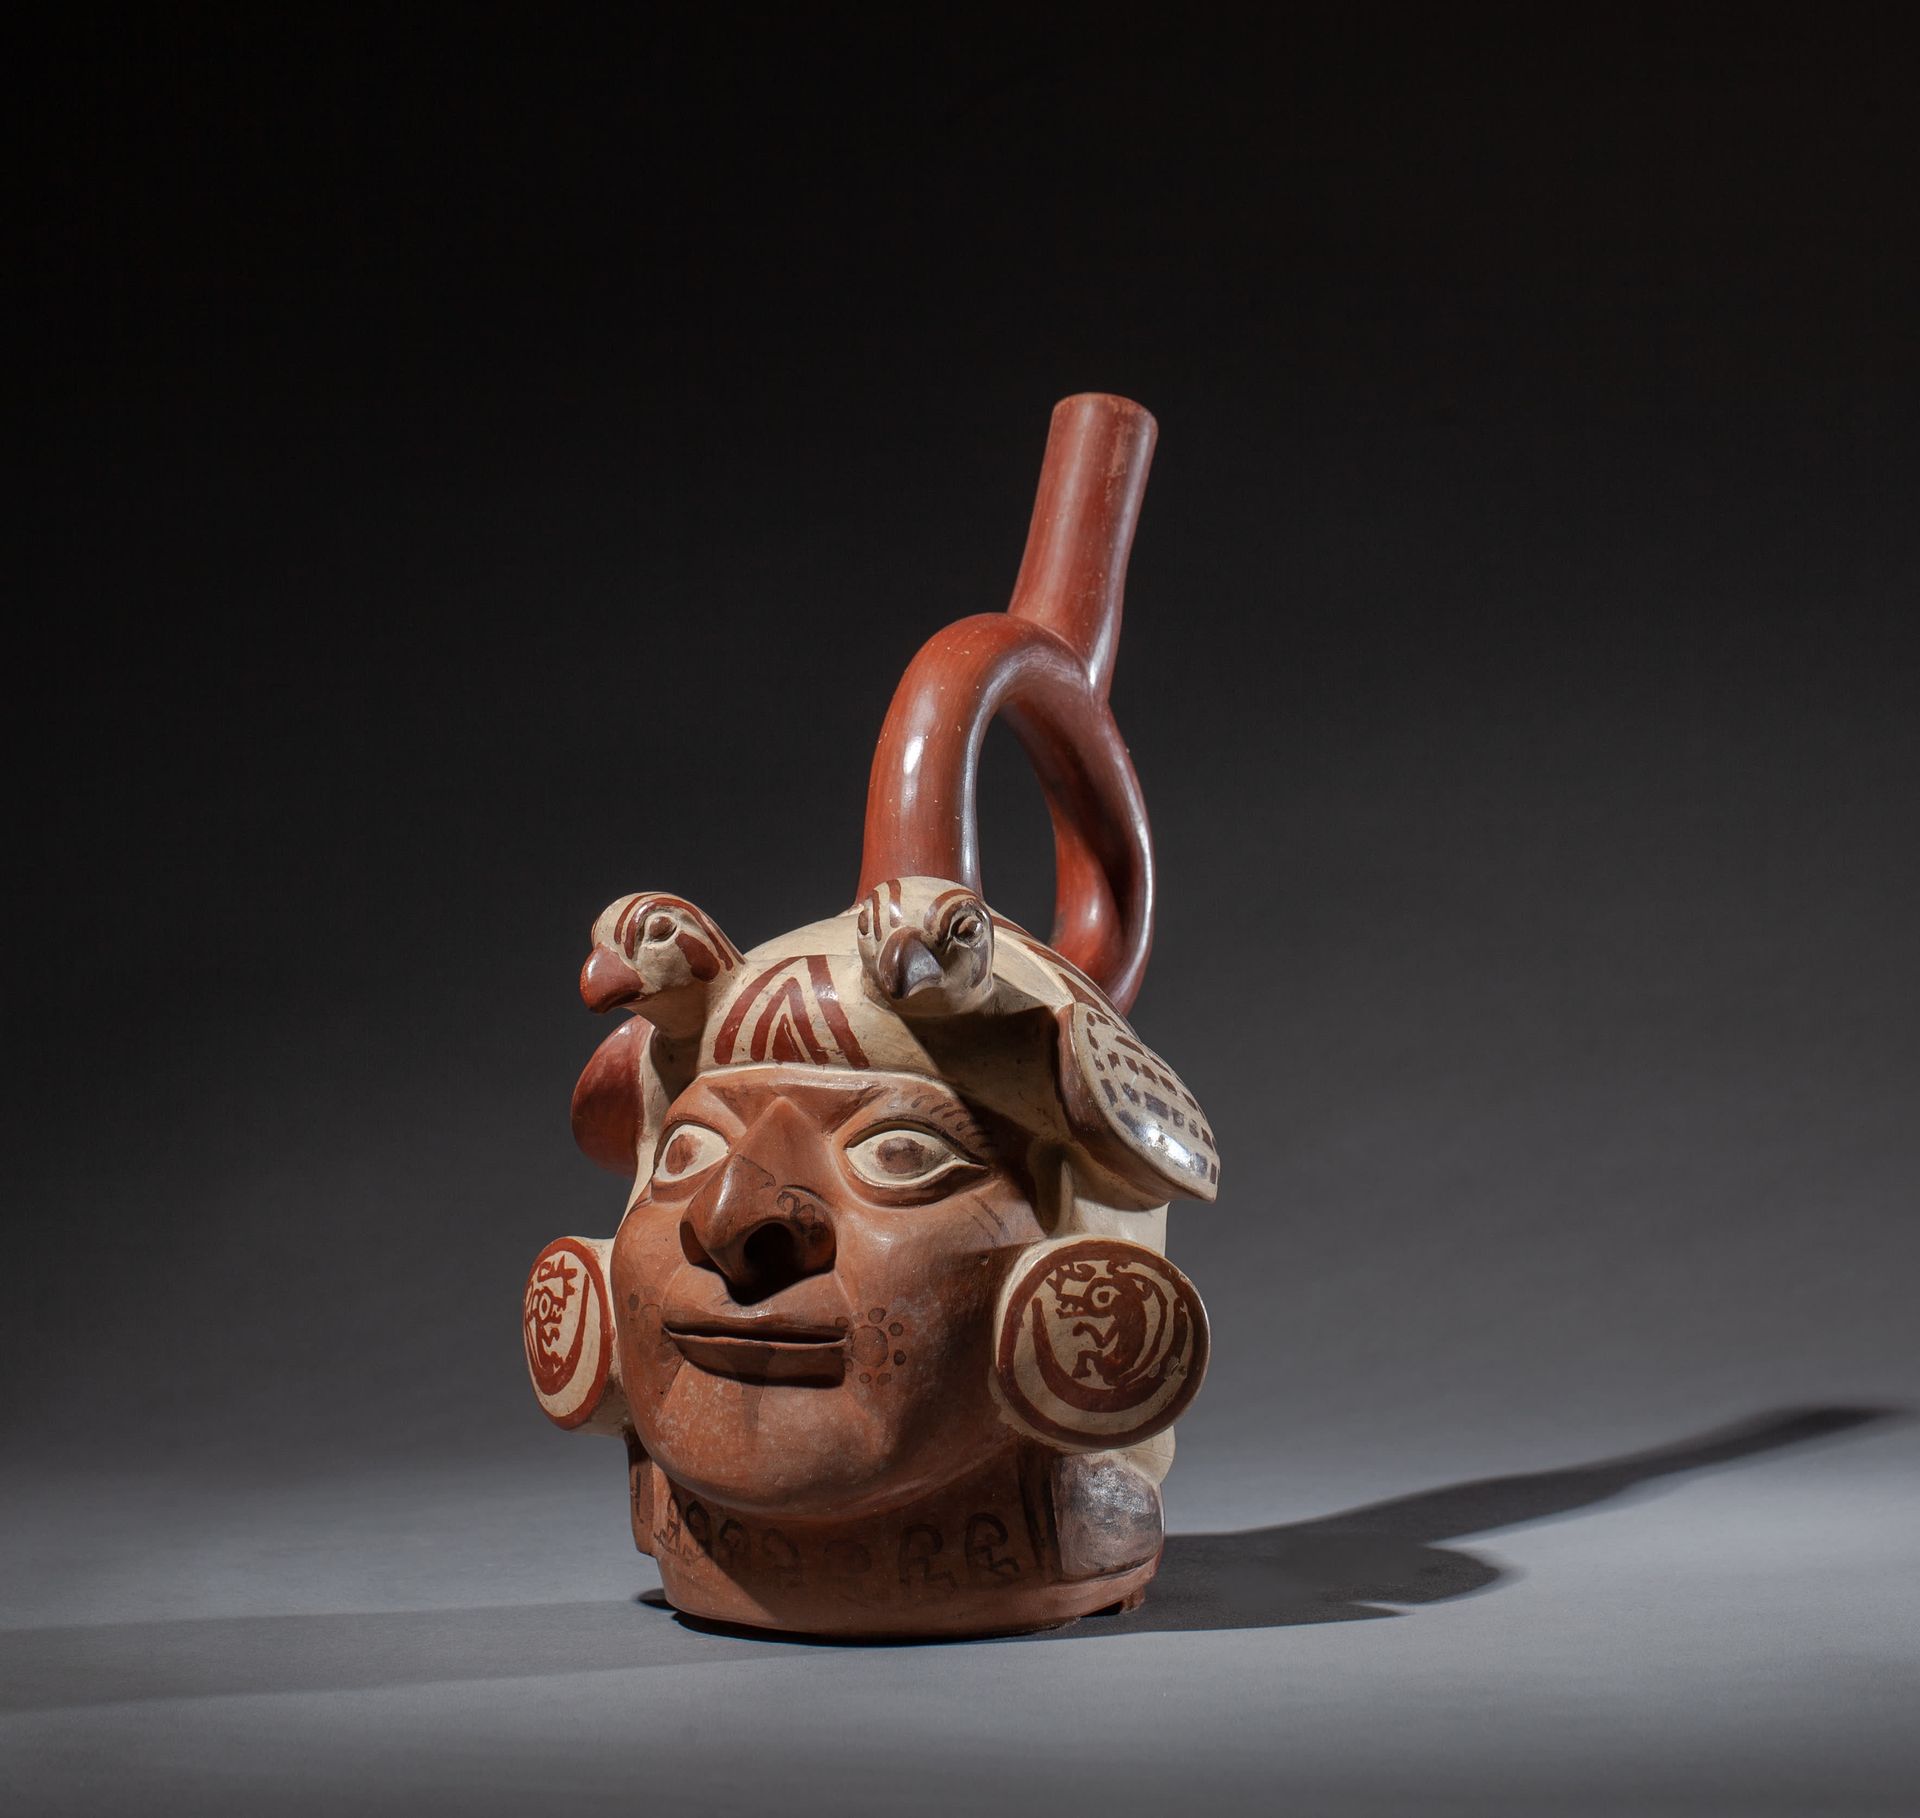 *Vase portrait de dignitaire 
The face is surmounted by a headdress representing&hellip;